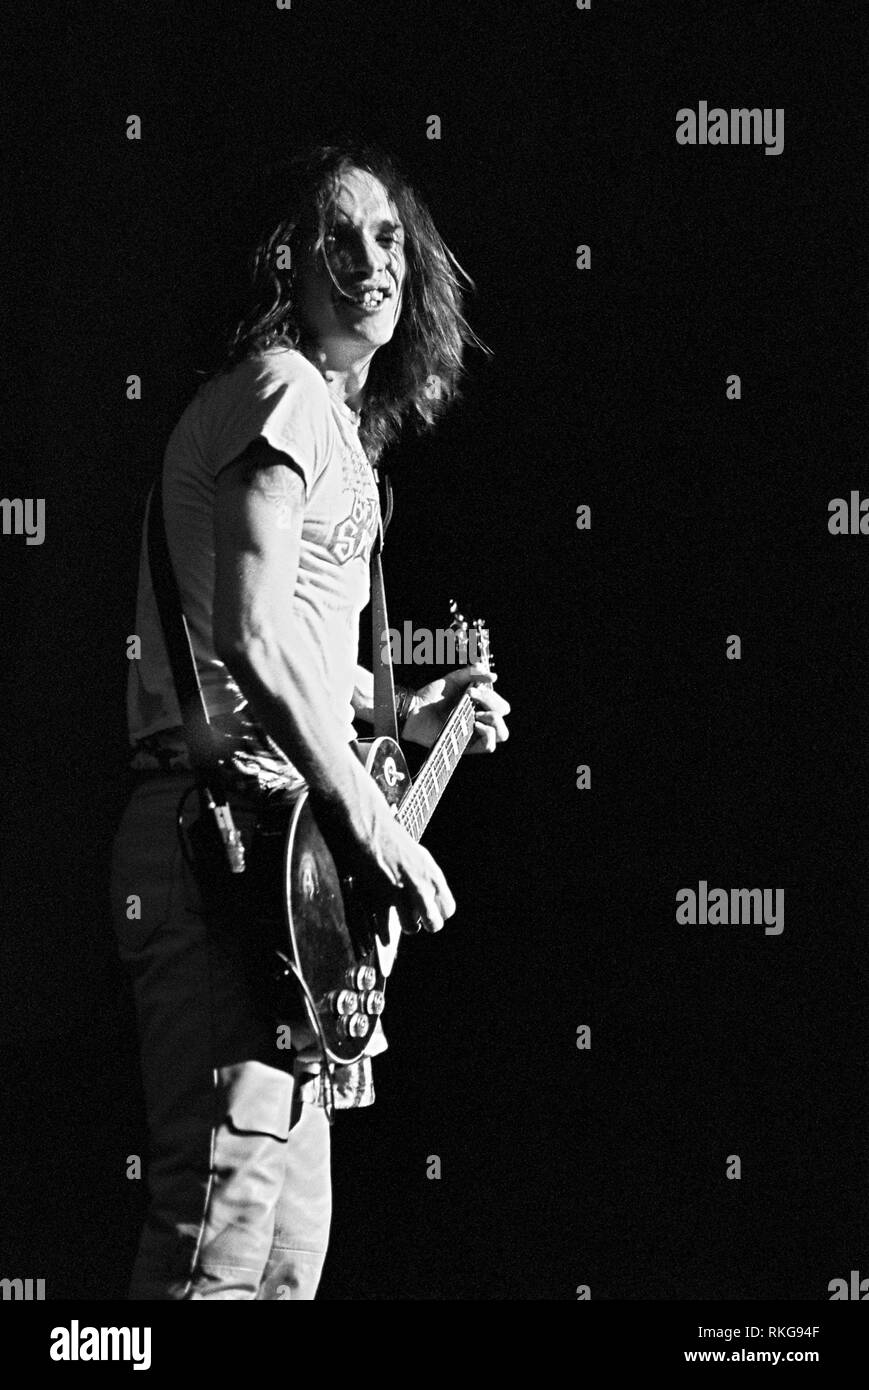 Justin Hawkins singer in the Darkness performing at the Brixton Academy , 27th February 2003, Brixton, London, England. Stock Photo